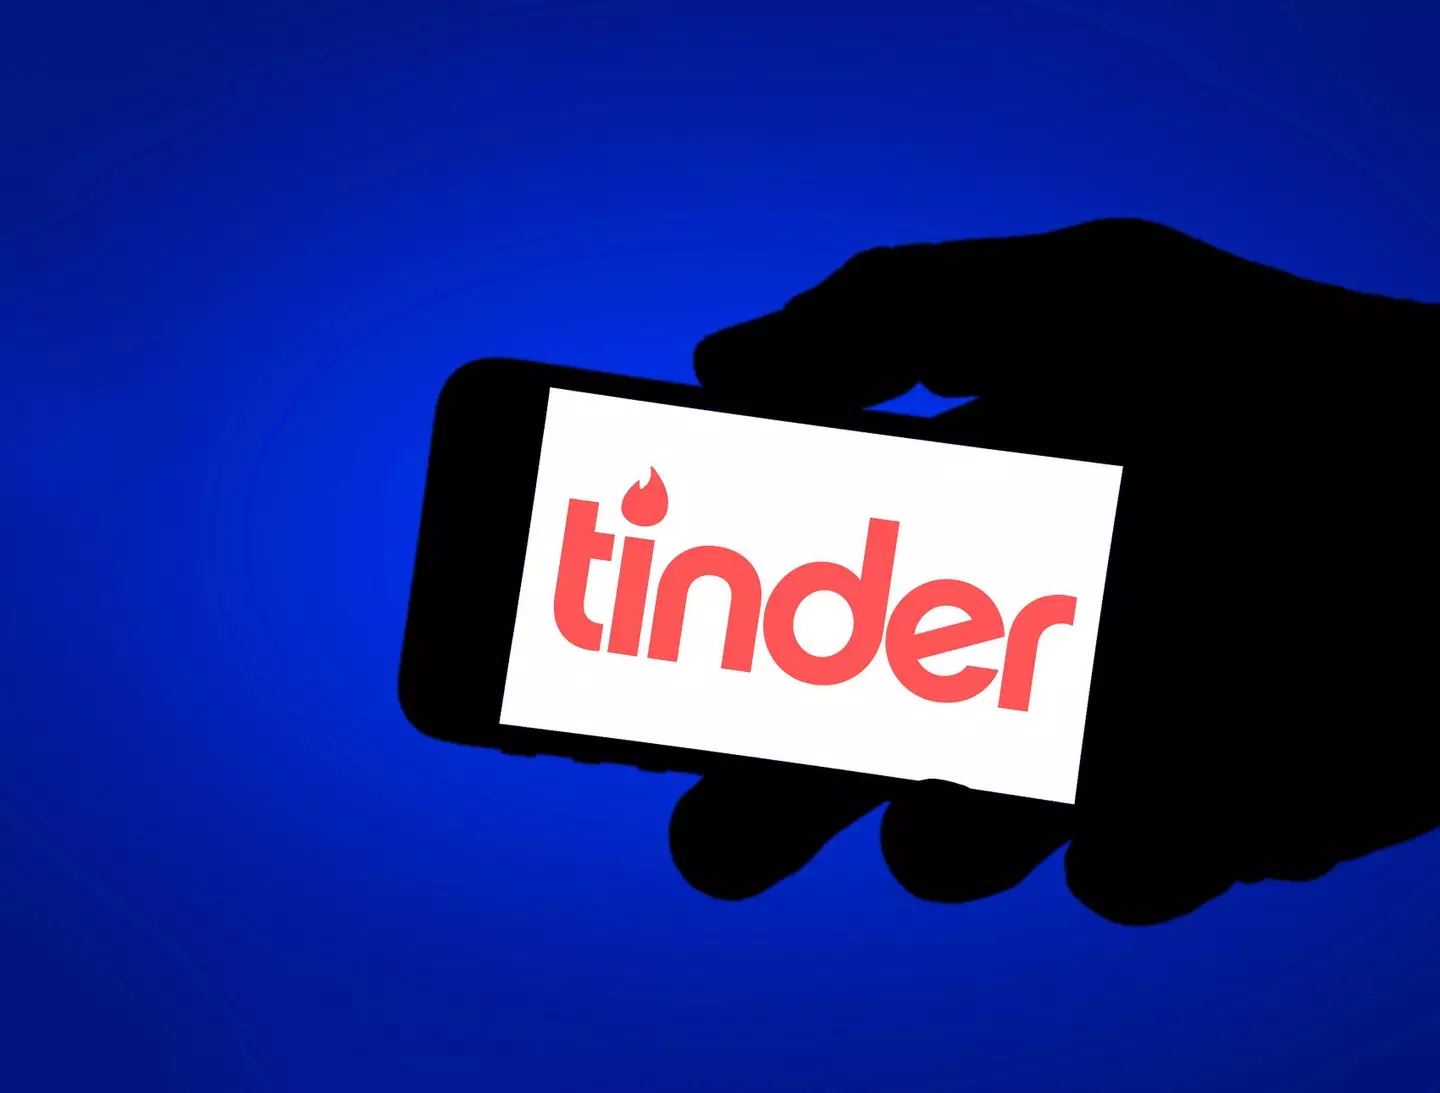 Tinder’s jam-packed new feature list makes now as good a time as any to get your bio in check.